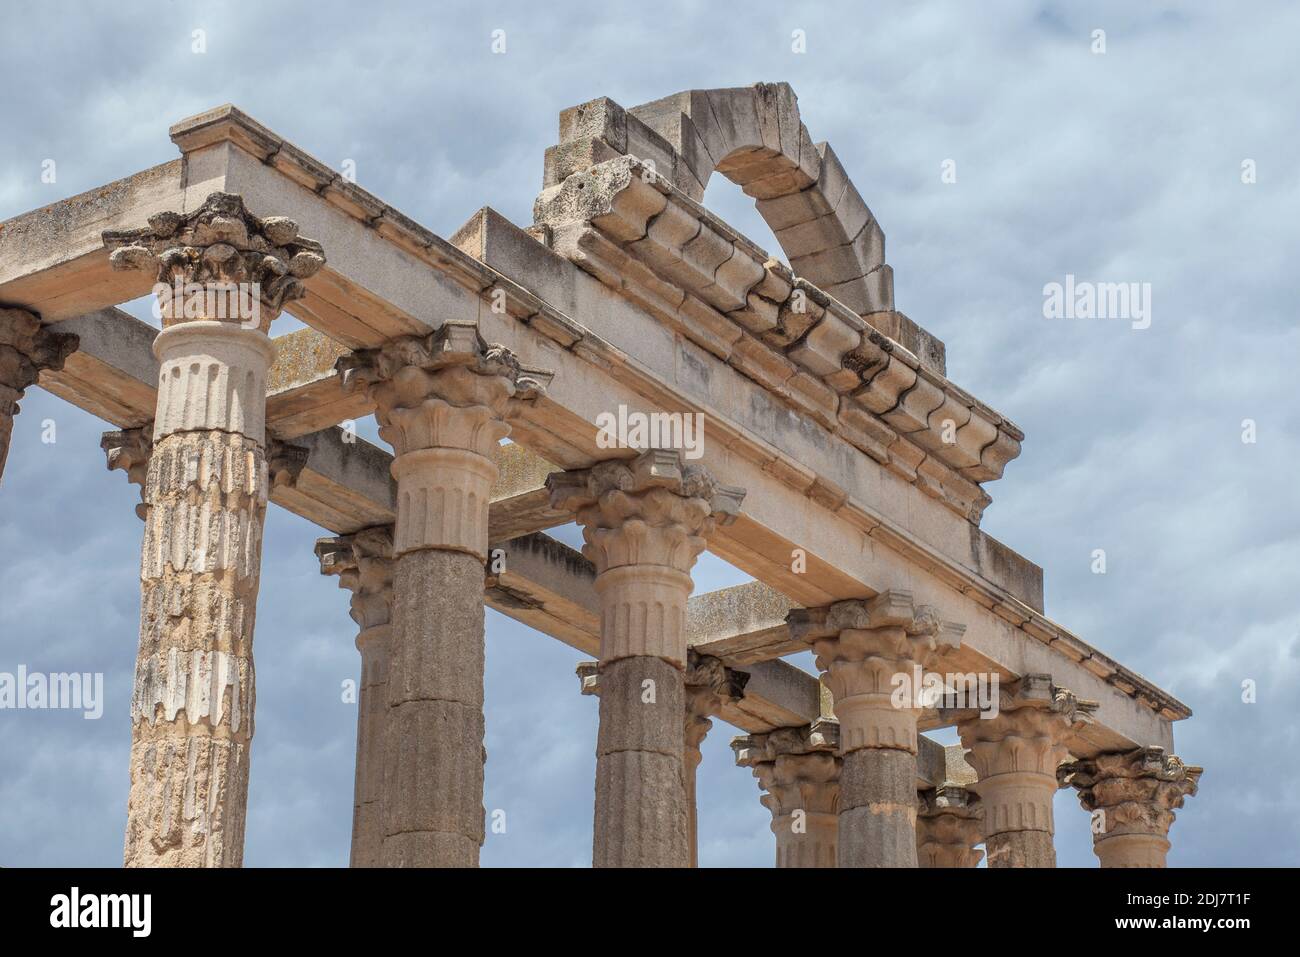 Temple of Diana. Imperial Cult Temple in Merida, Extremadura, Spain Stock Photo